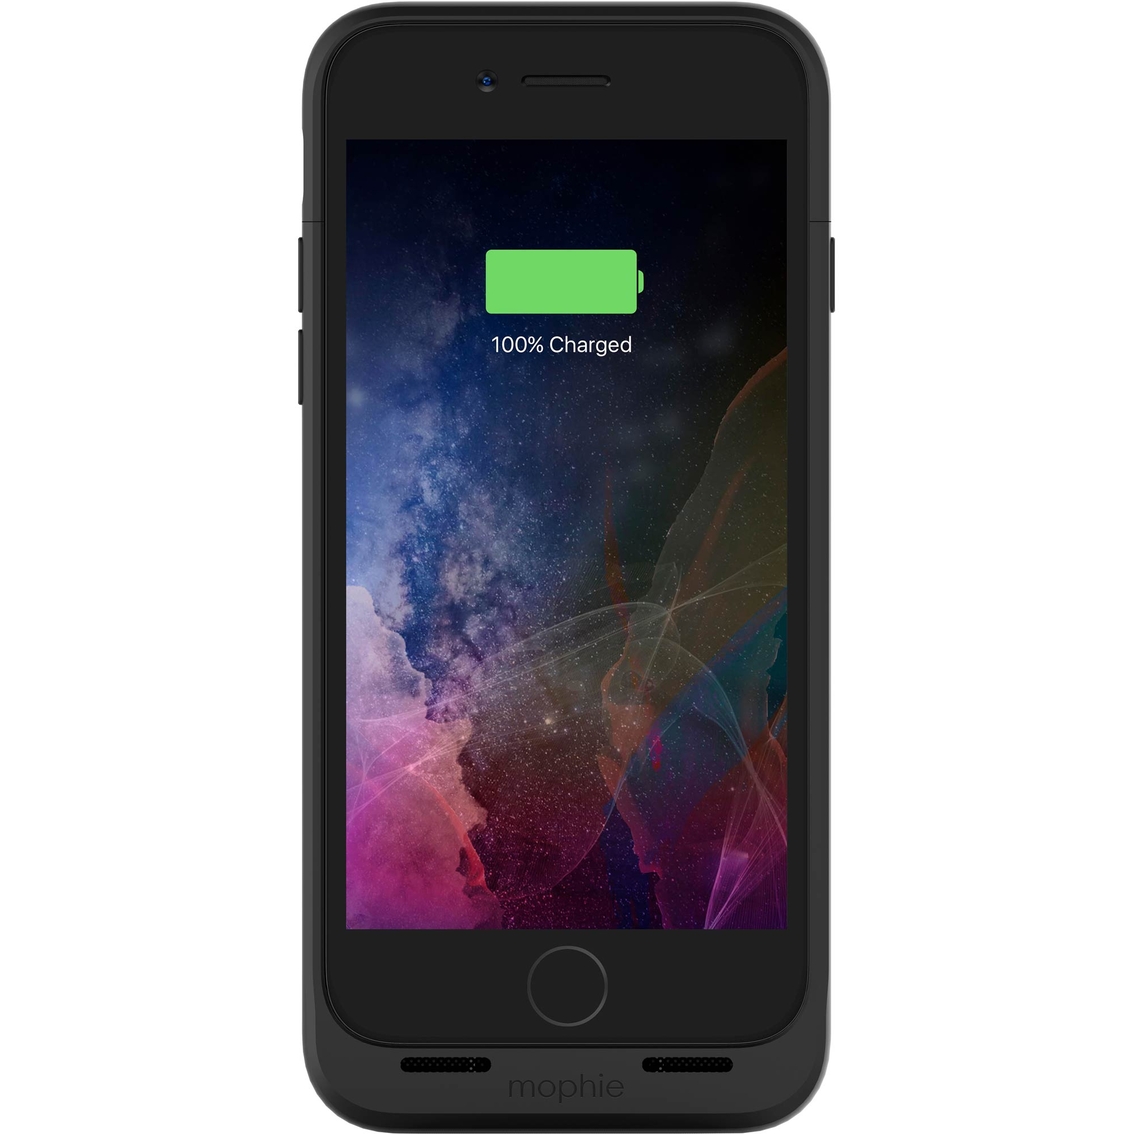 Mophie Juice Pack Air Rechargeable Battery Case for iPhone 7 - Image 4 of 4